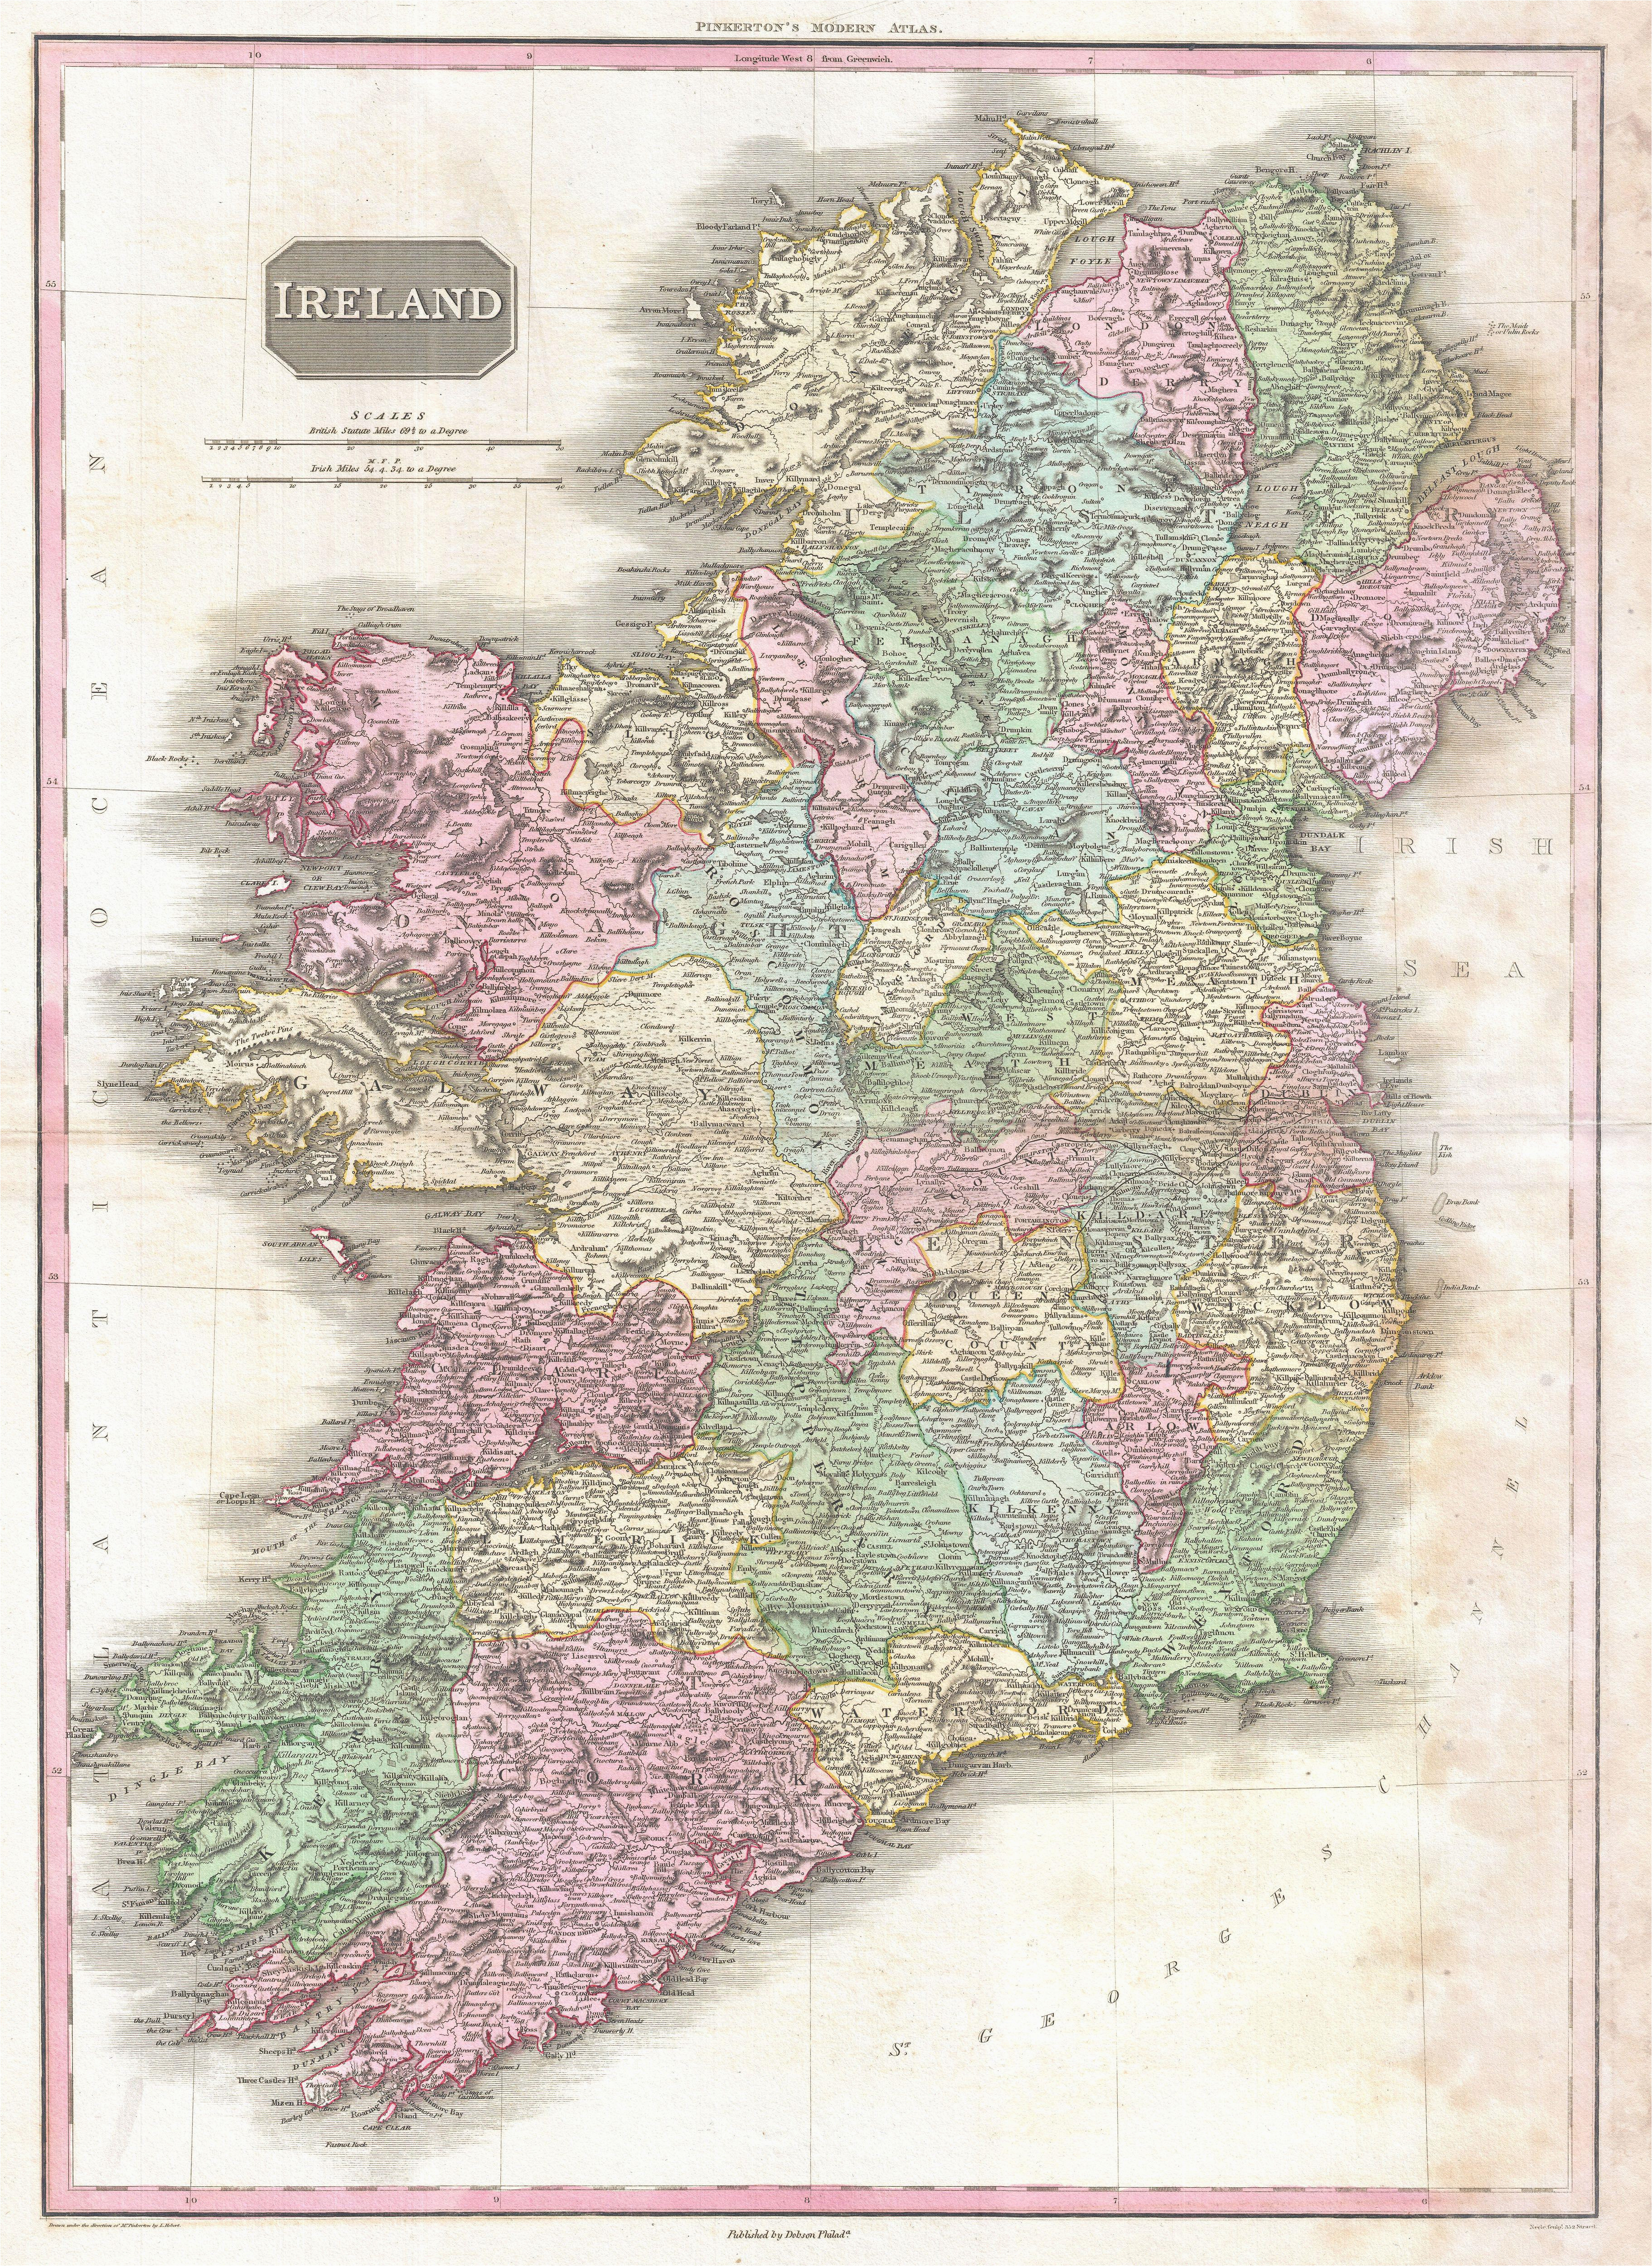 Picture Of Ireland Map File 1818 Pinkerton Map Of Ireland Geographicus Ireland